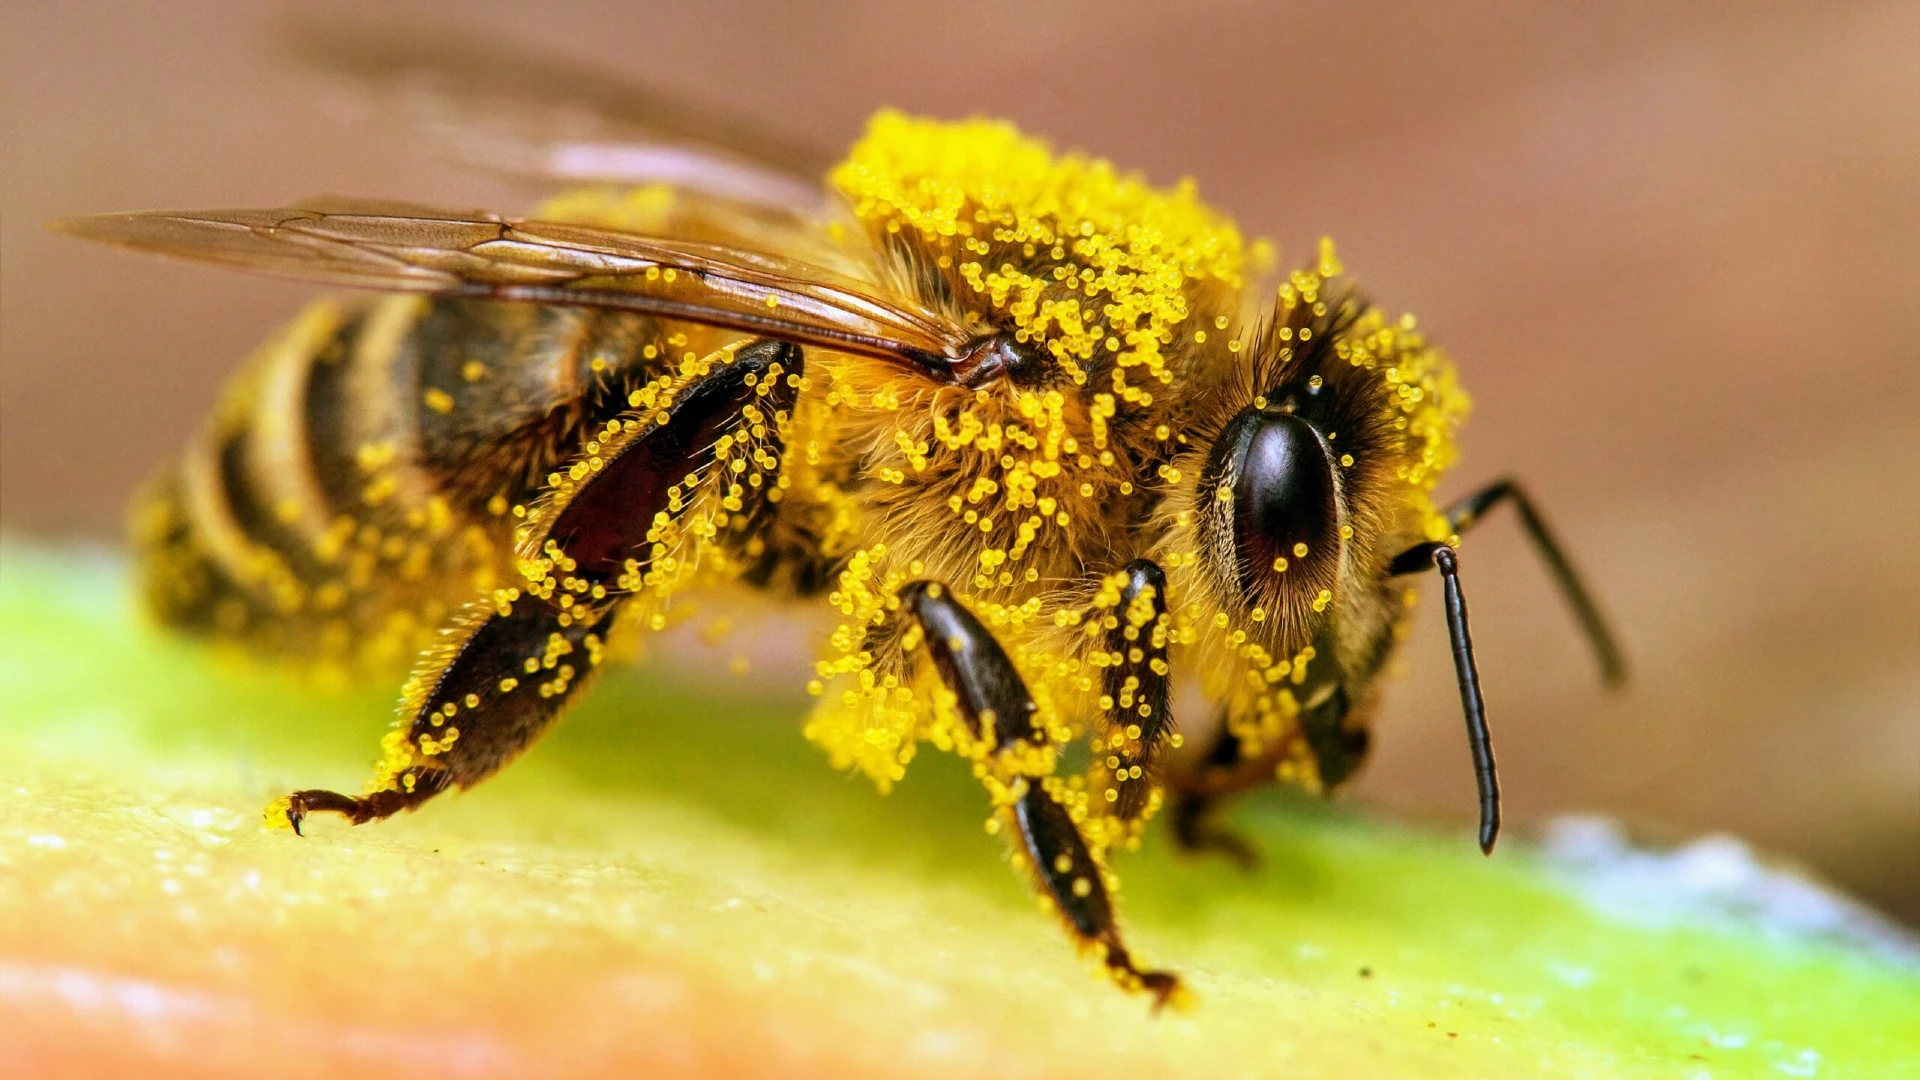 Strange but True: Honeybees Can Recognize the Difference Between Even and Odd Numbers